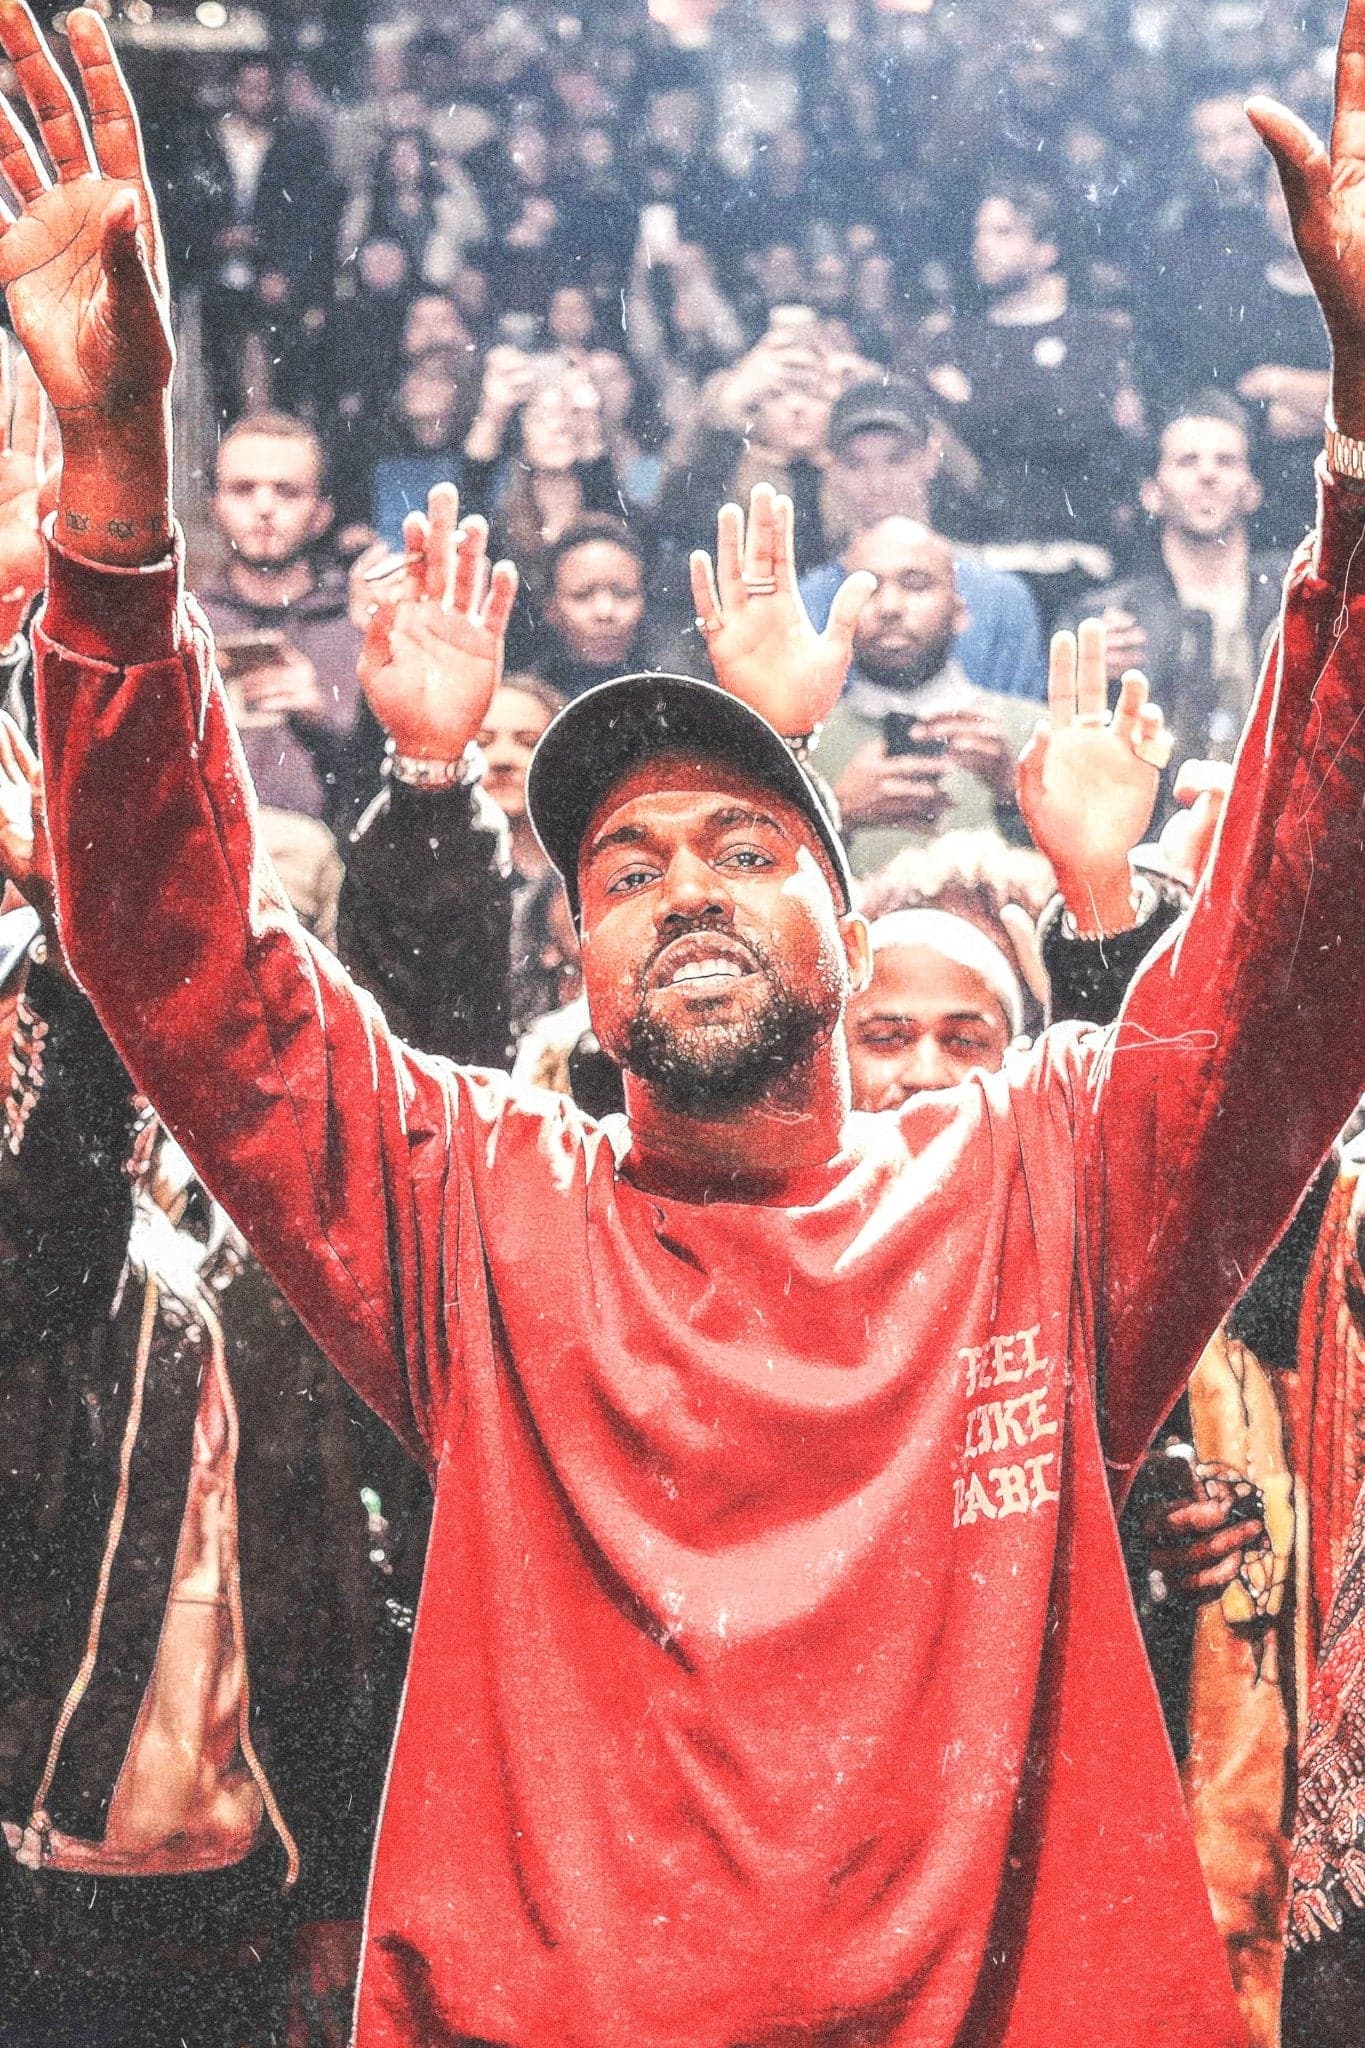 Kanye West Posters Plug, Free Shipping with $50+